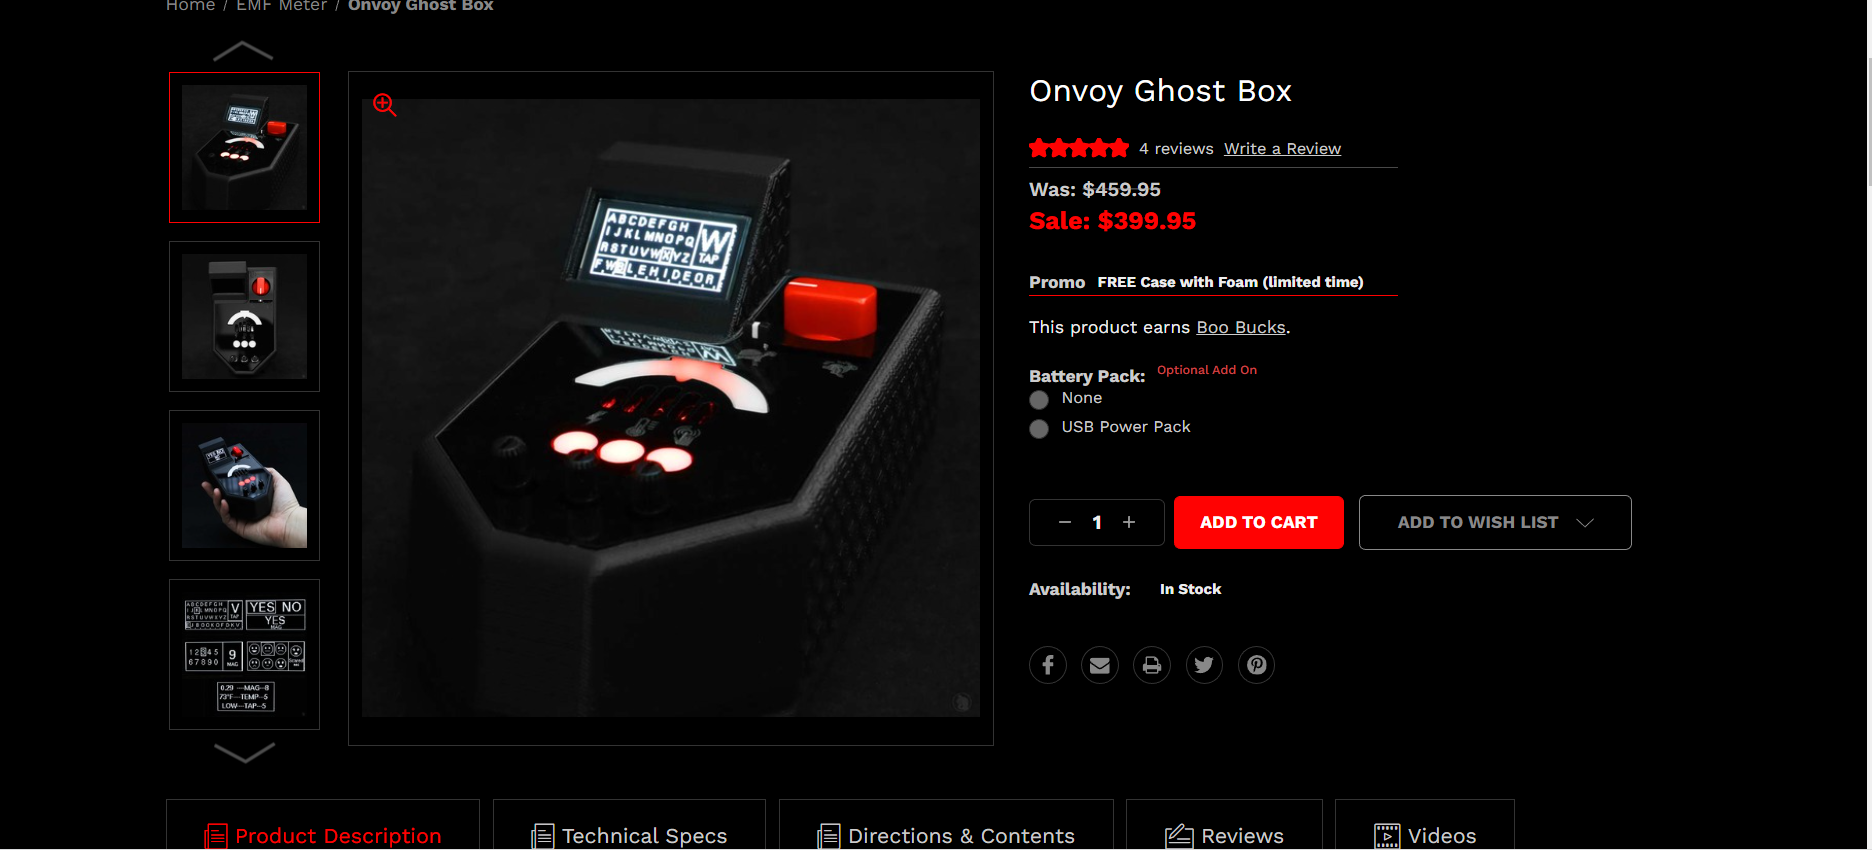 Onvoy Ghost box from Ghoststop